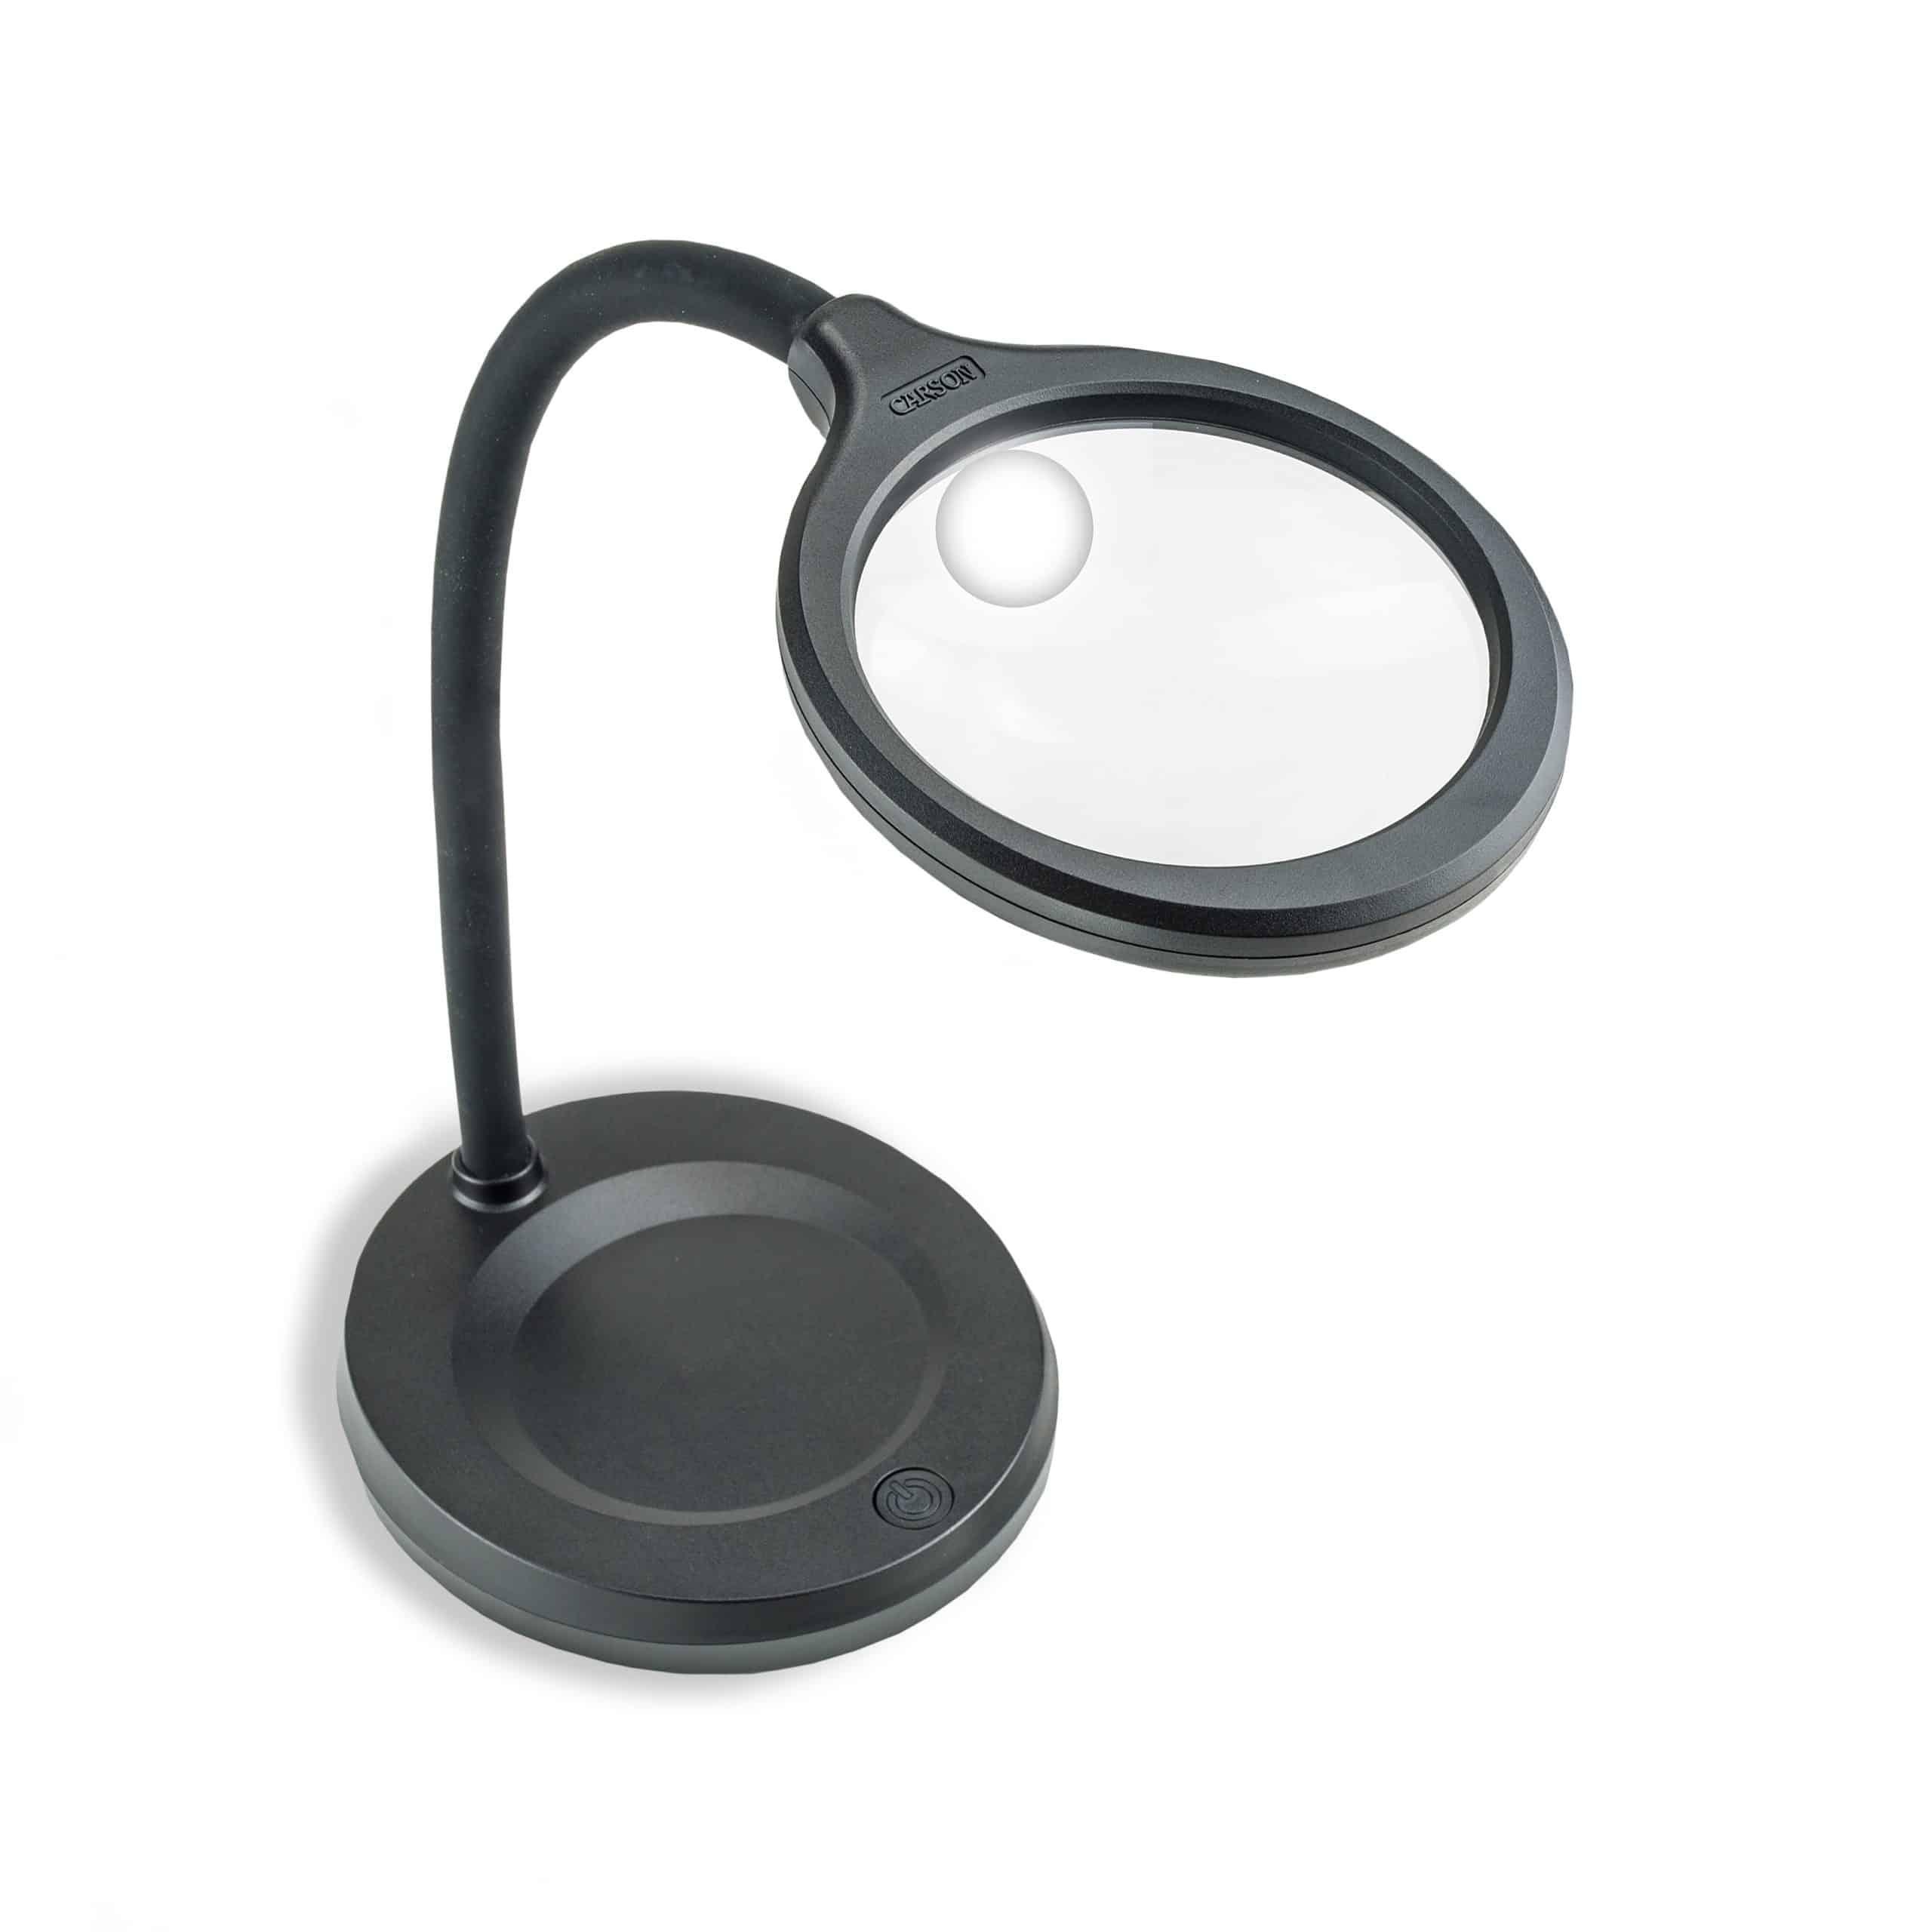 LED 2X Magnifier Desk Lamp with 5X power spot lens - The Low Vision Store